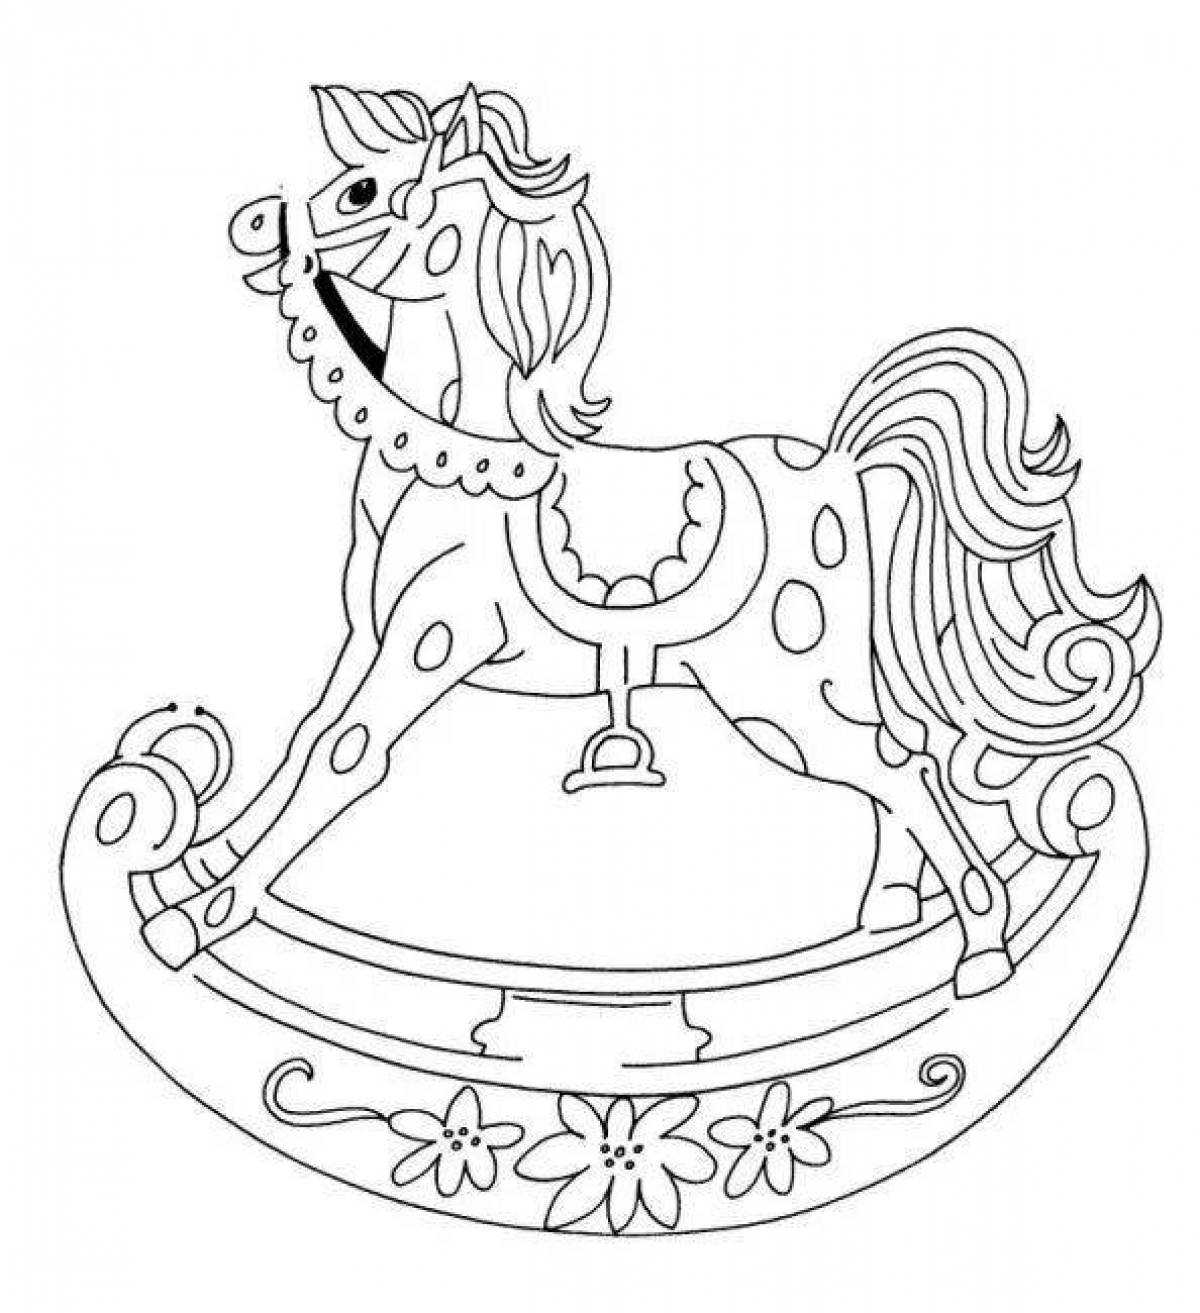 Coloring book bright Gorodets horse